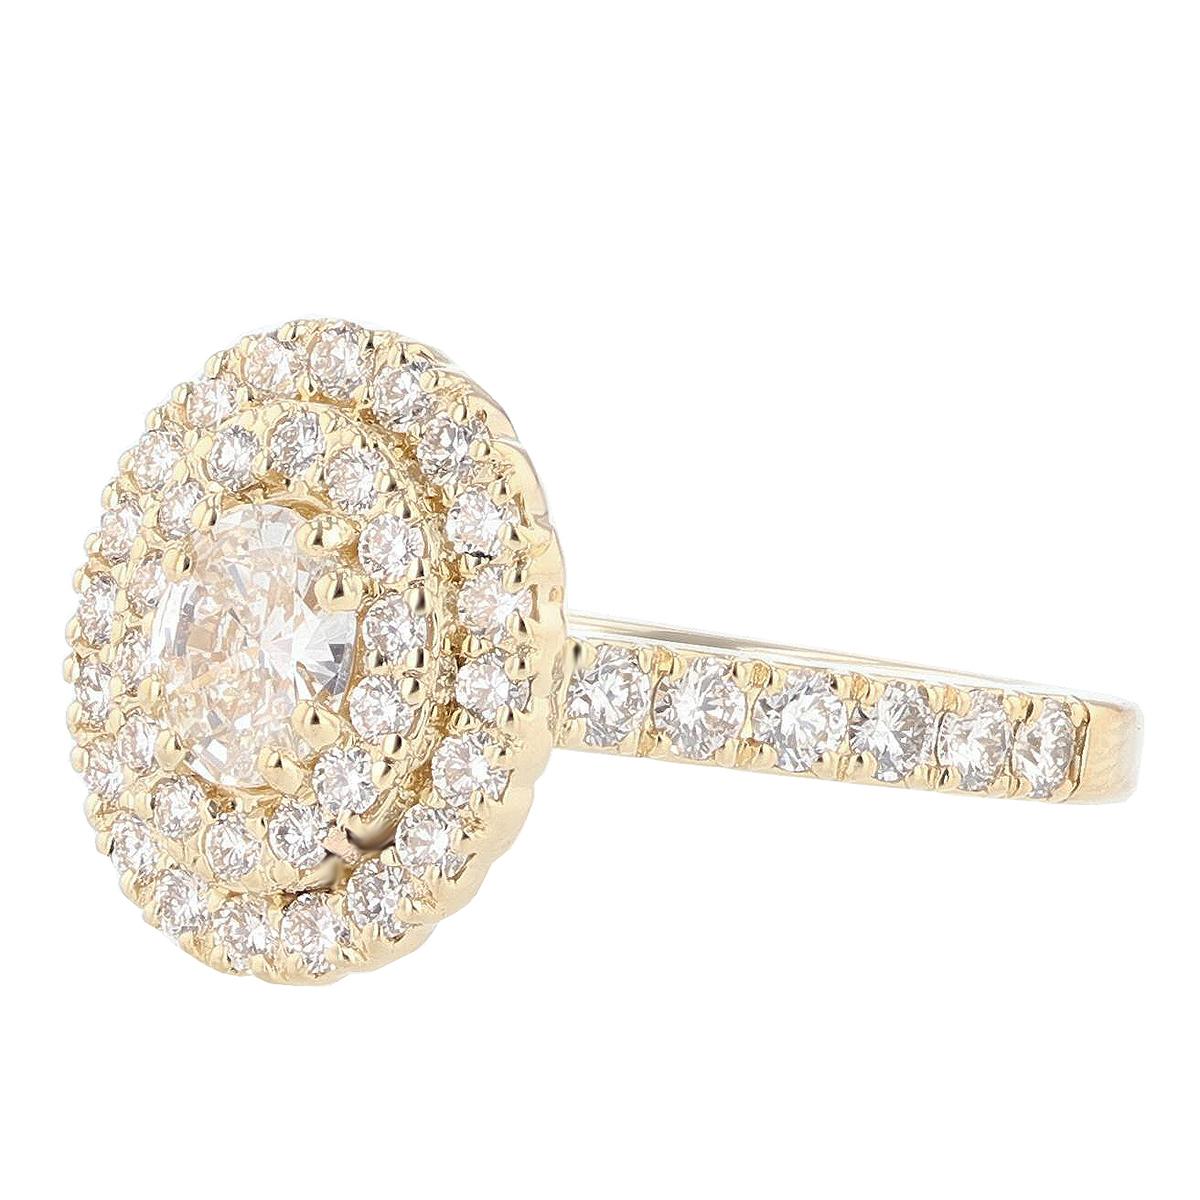 This ring is made with 14 karat yellow gold and features a prong set  0.47ct  IGI certified oval cut diamond (IGI Certificate number: 5813519 ), with a color grade (E) and clarity grade (VS1) and is surrounded by 49 round cut diamonds weighing